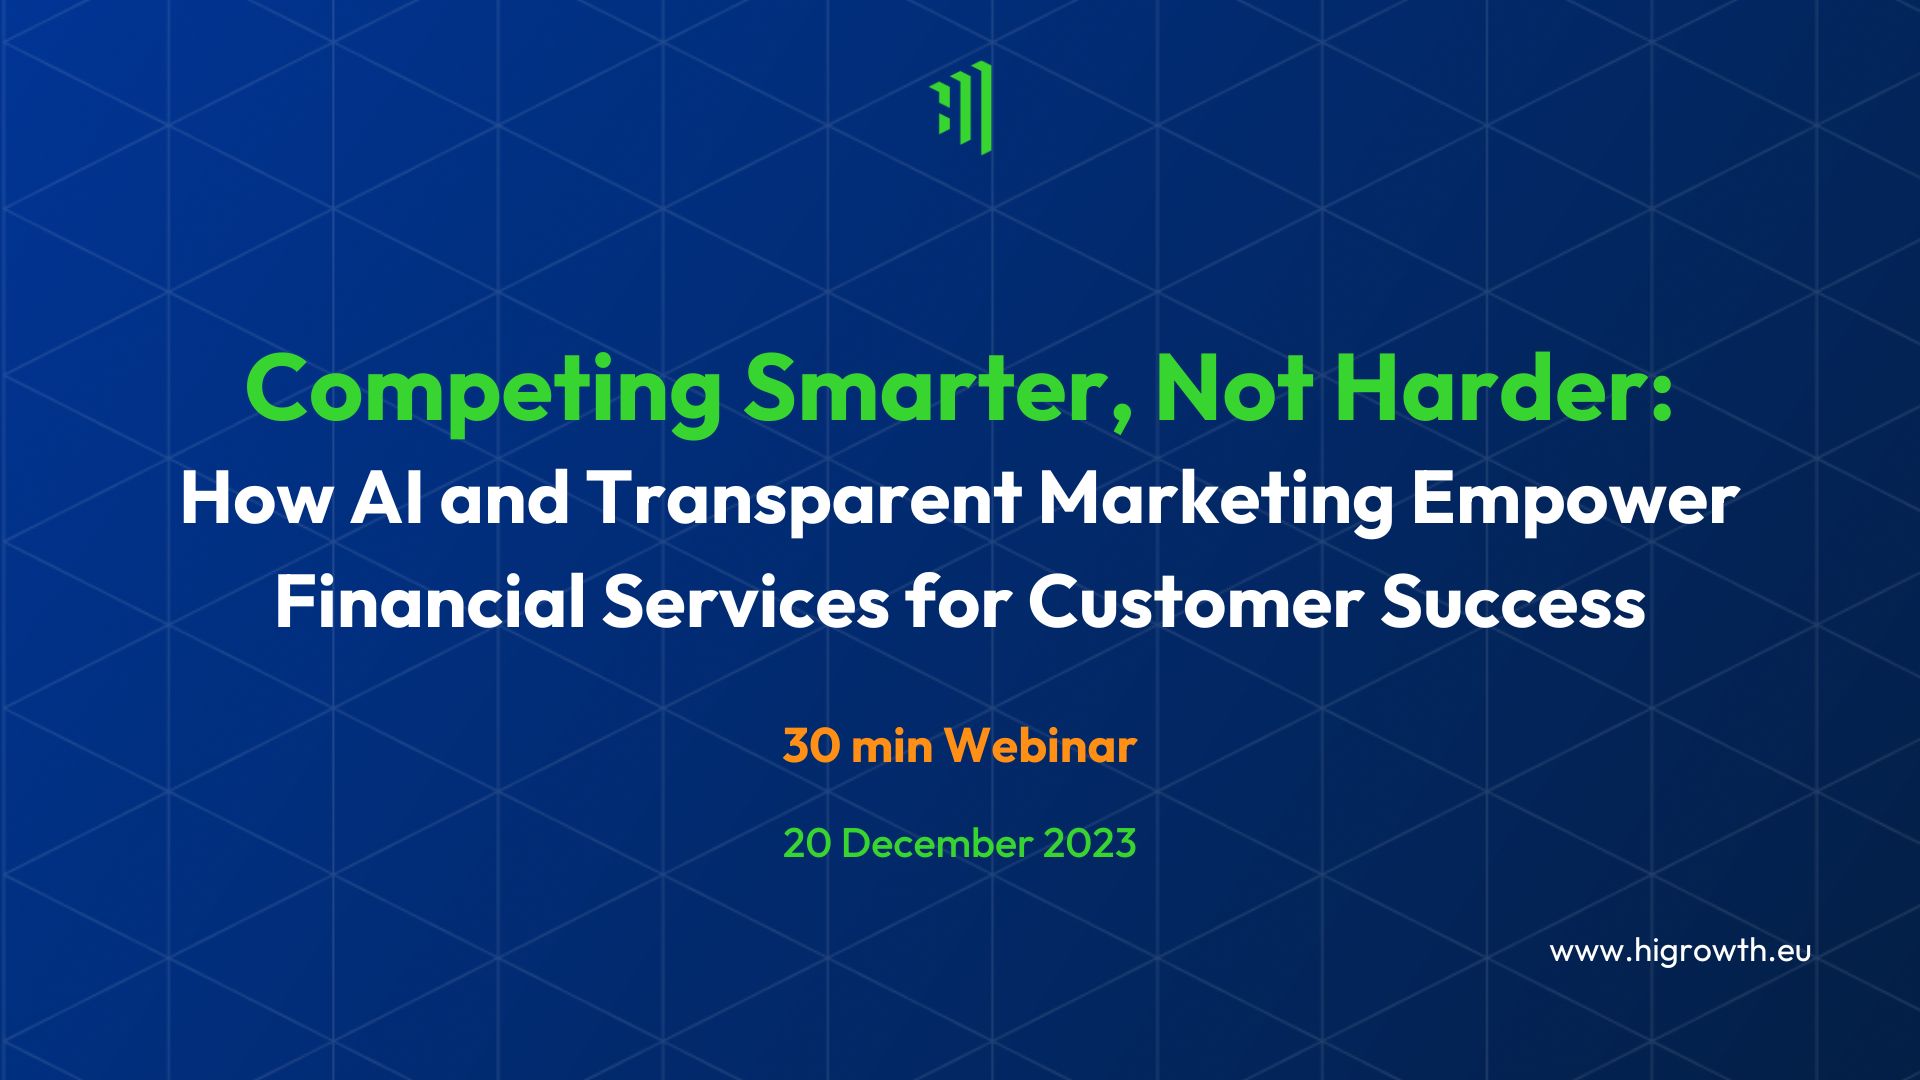 WEBINAR: Competing Smarter, Not Harder: How AI and Transparent Marketing Empower Financial Services for Customer Success